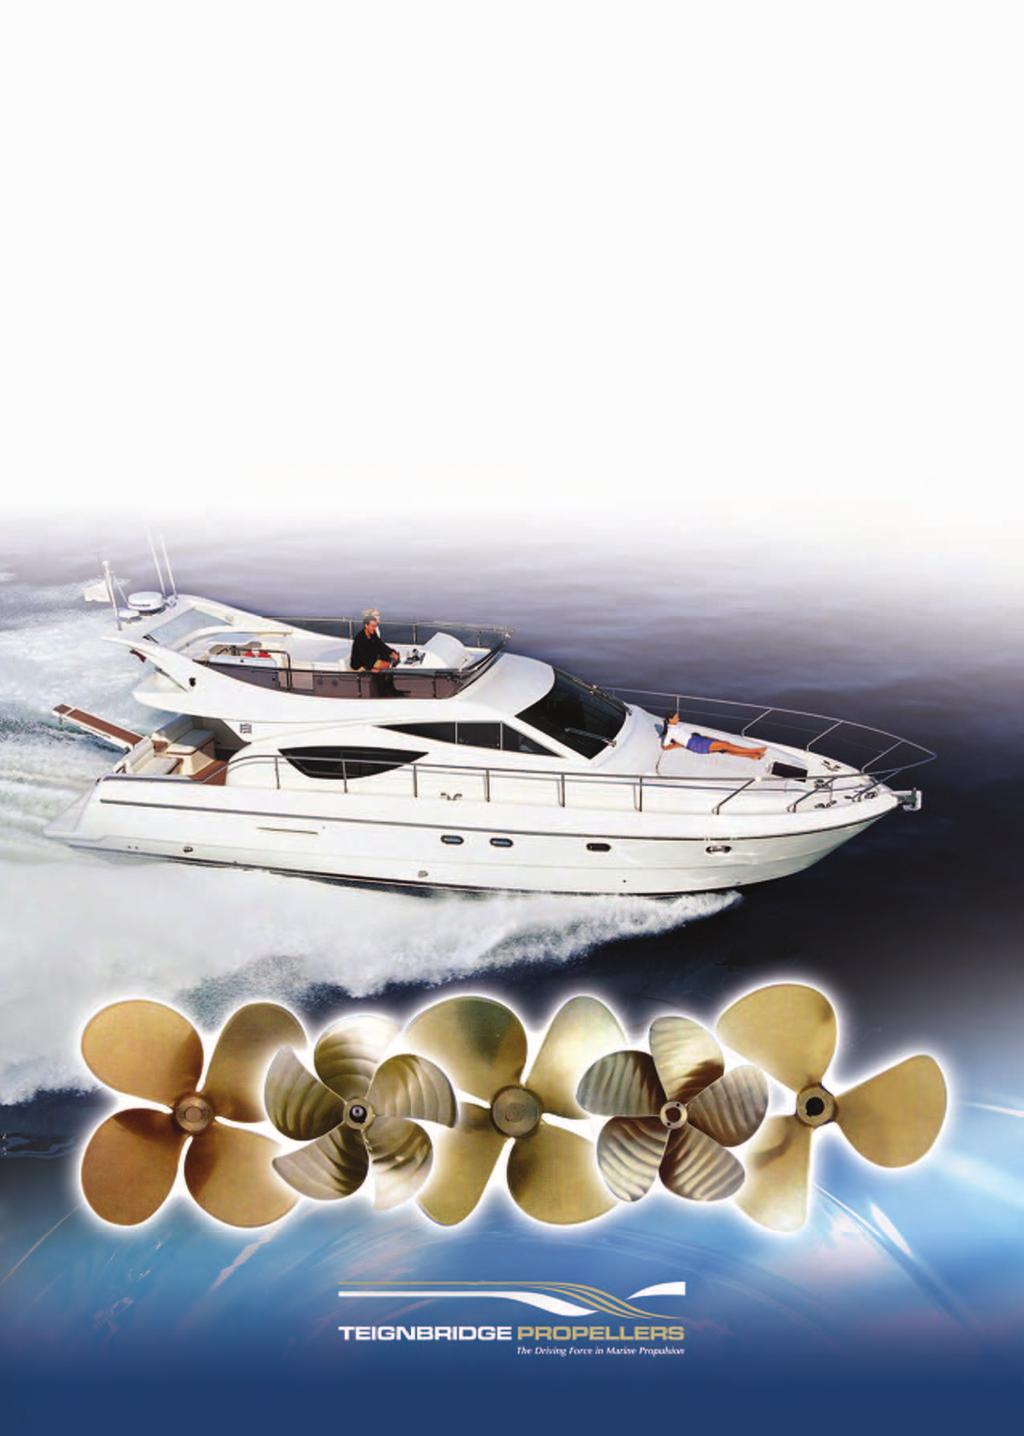 Teignbridge Standard Propellers Teignbridge have been manufacturing standard propellers for the world s production boat builders for decades.